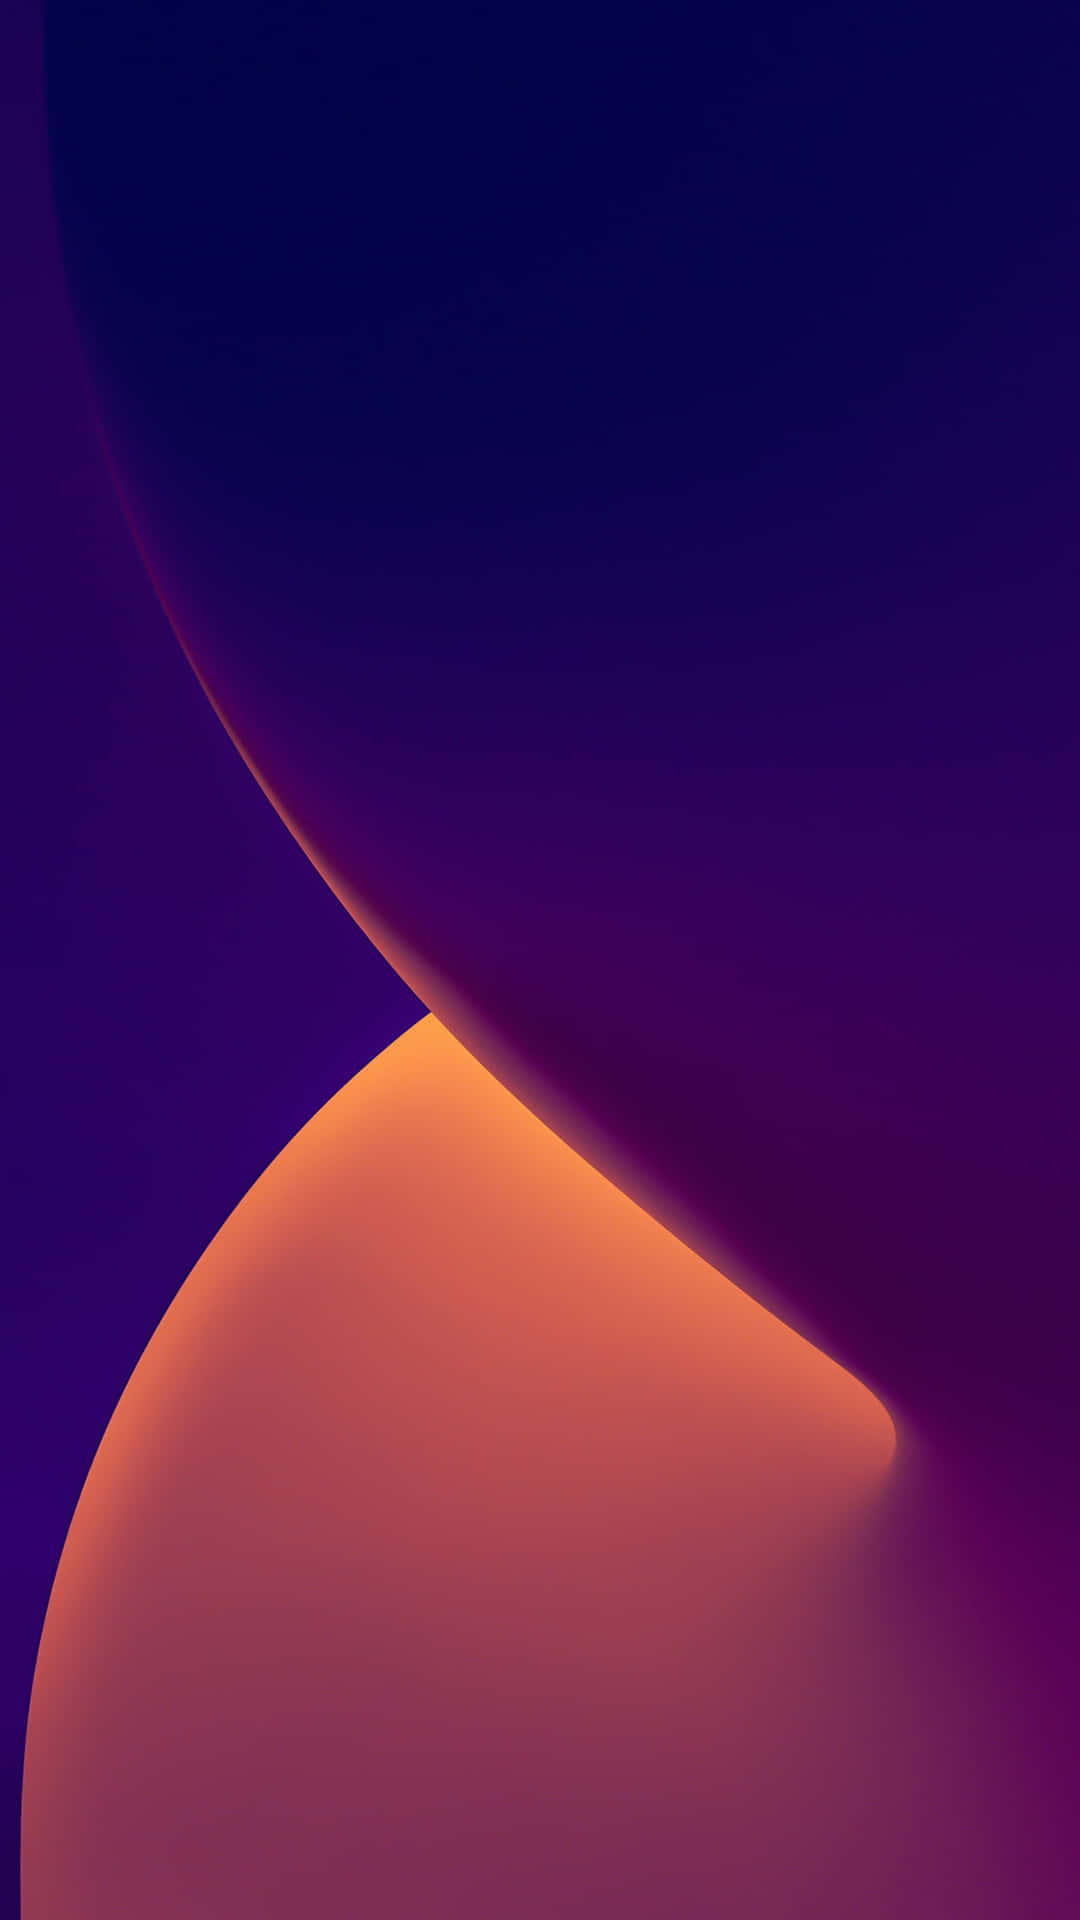 Download An Abstract Purple And Orange Background | Wallpapers.com